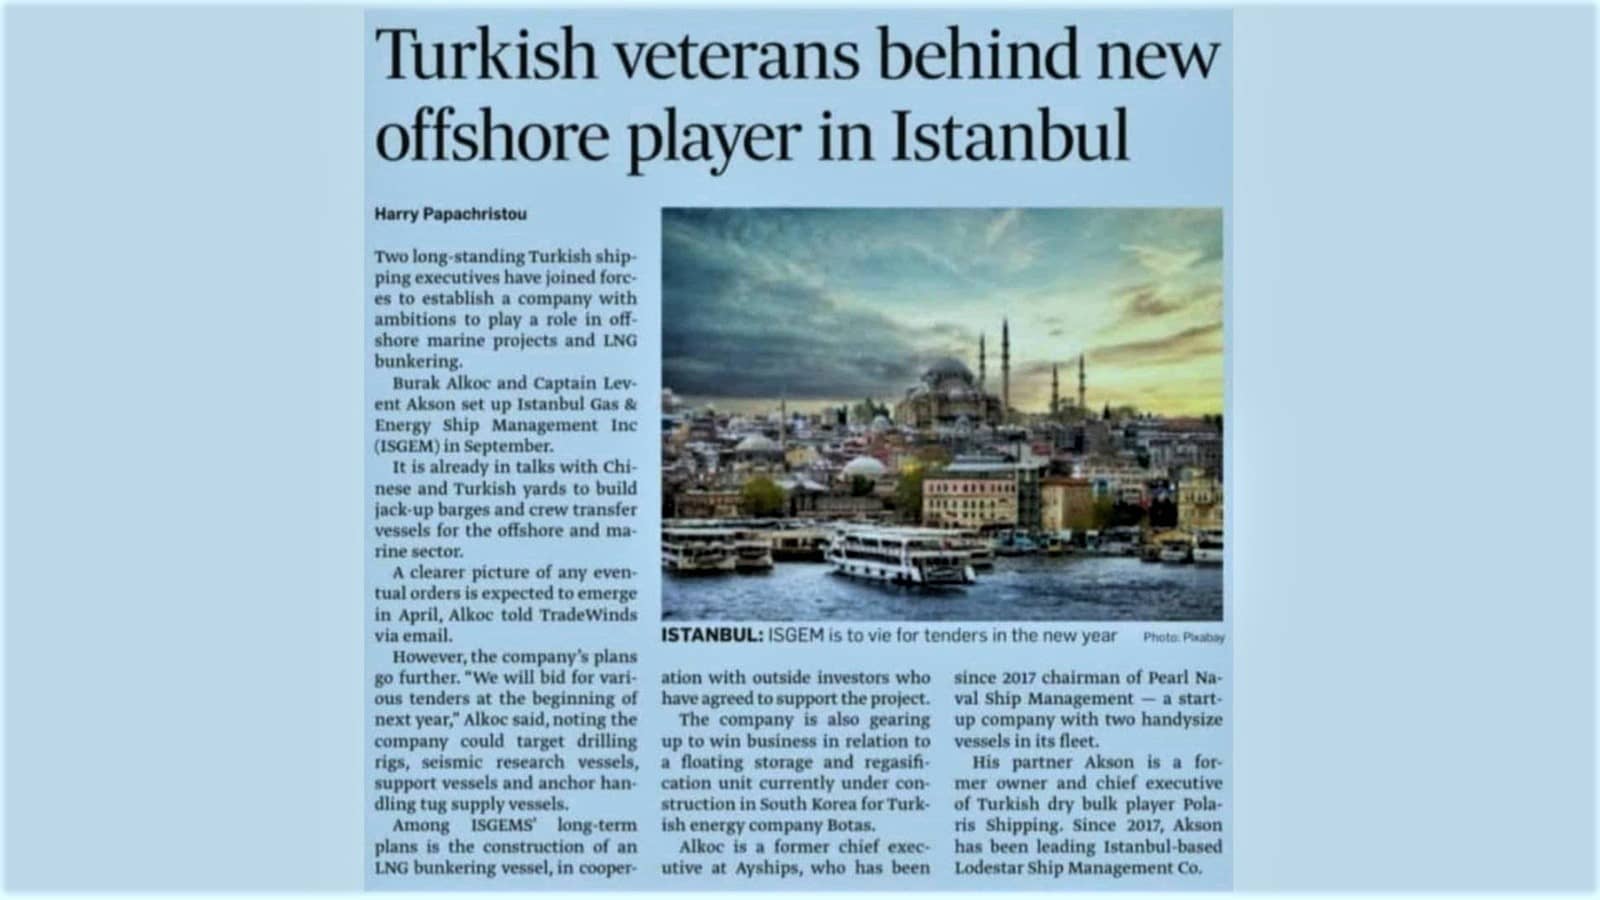 Turkish veterans behind new offshore player in Istanbul